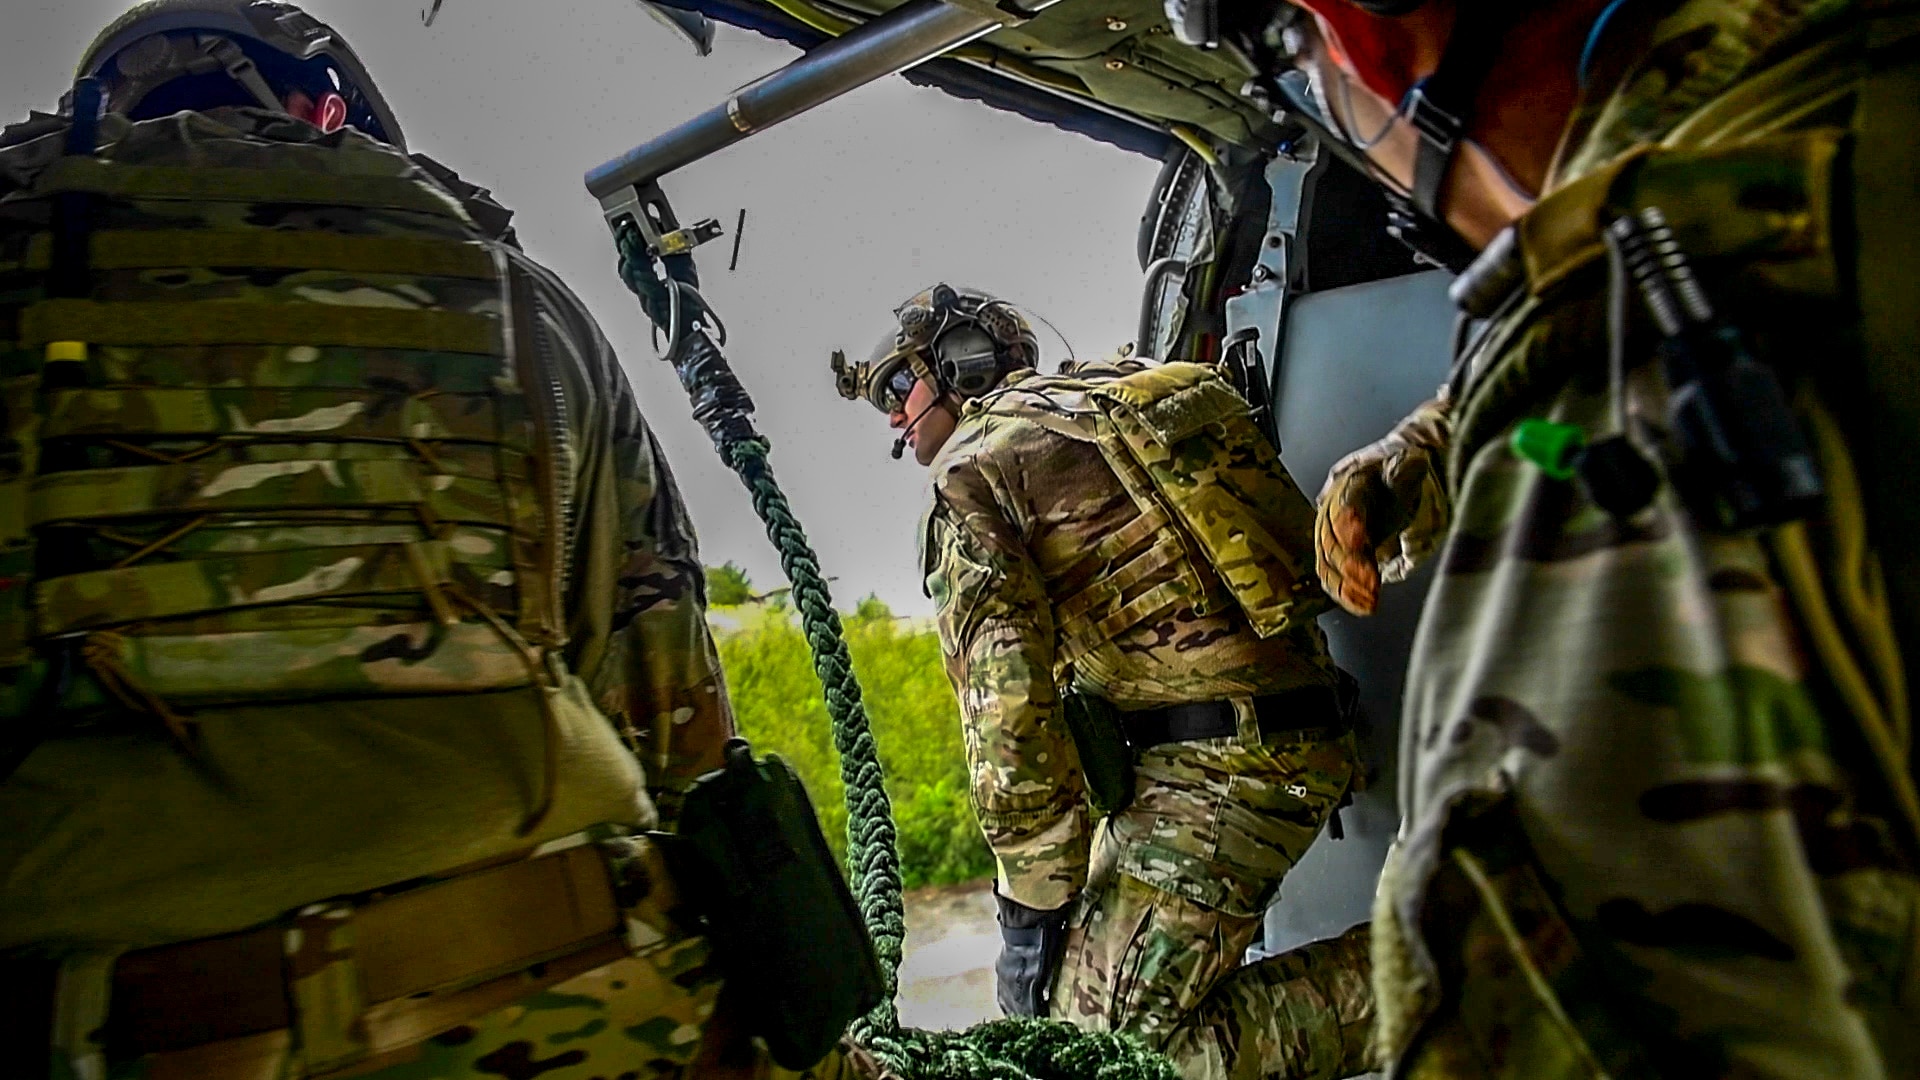 190819-N-TP834-1119
SANTA RITA, Guam (Aug. 19, 2019) Sailors assigned to Explosive Ordnance Disposal Unit (EODMU) 5 monitor the drop zone from an MH-60S Seahawk helicopter, attached to the Island Knights of Helicopter Sea Combat Squadron (HSC) 25, during a fast-roping evolution during Exercise Hydracrab. Hydracrab is quadrilateral exercise conducted by forces from Australia, Canada, New Zealand and U.S. Naval forces. The purpose of this exercise is to prepare the participating Explosive Ordnance Disposal (EOD) forces to operate as an integrated, capable and potent allied force ready to respond to a changing and complex maritime environment in the Indo-Pacific region. (U.S. Navy photo by Mass Communication Specialist 1st Class John Philip Wagner Jr./Released)